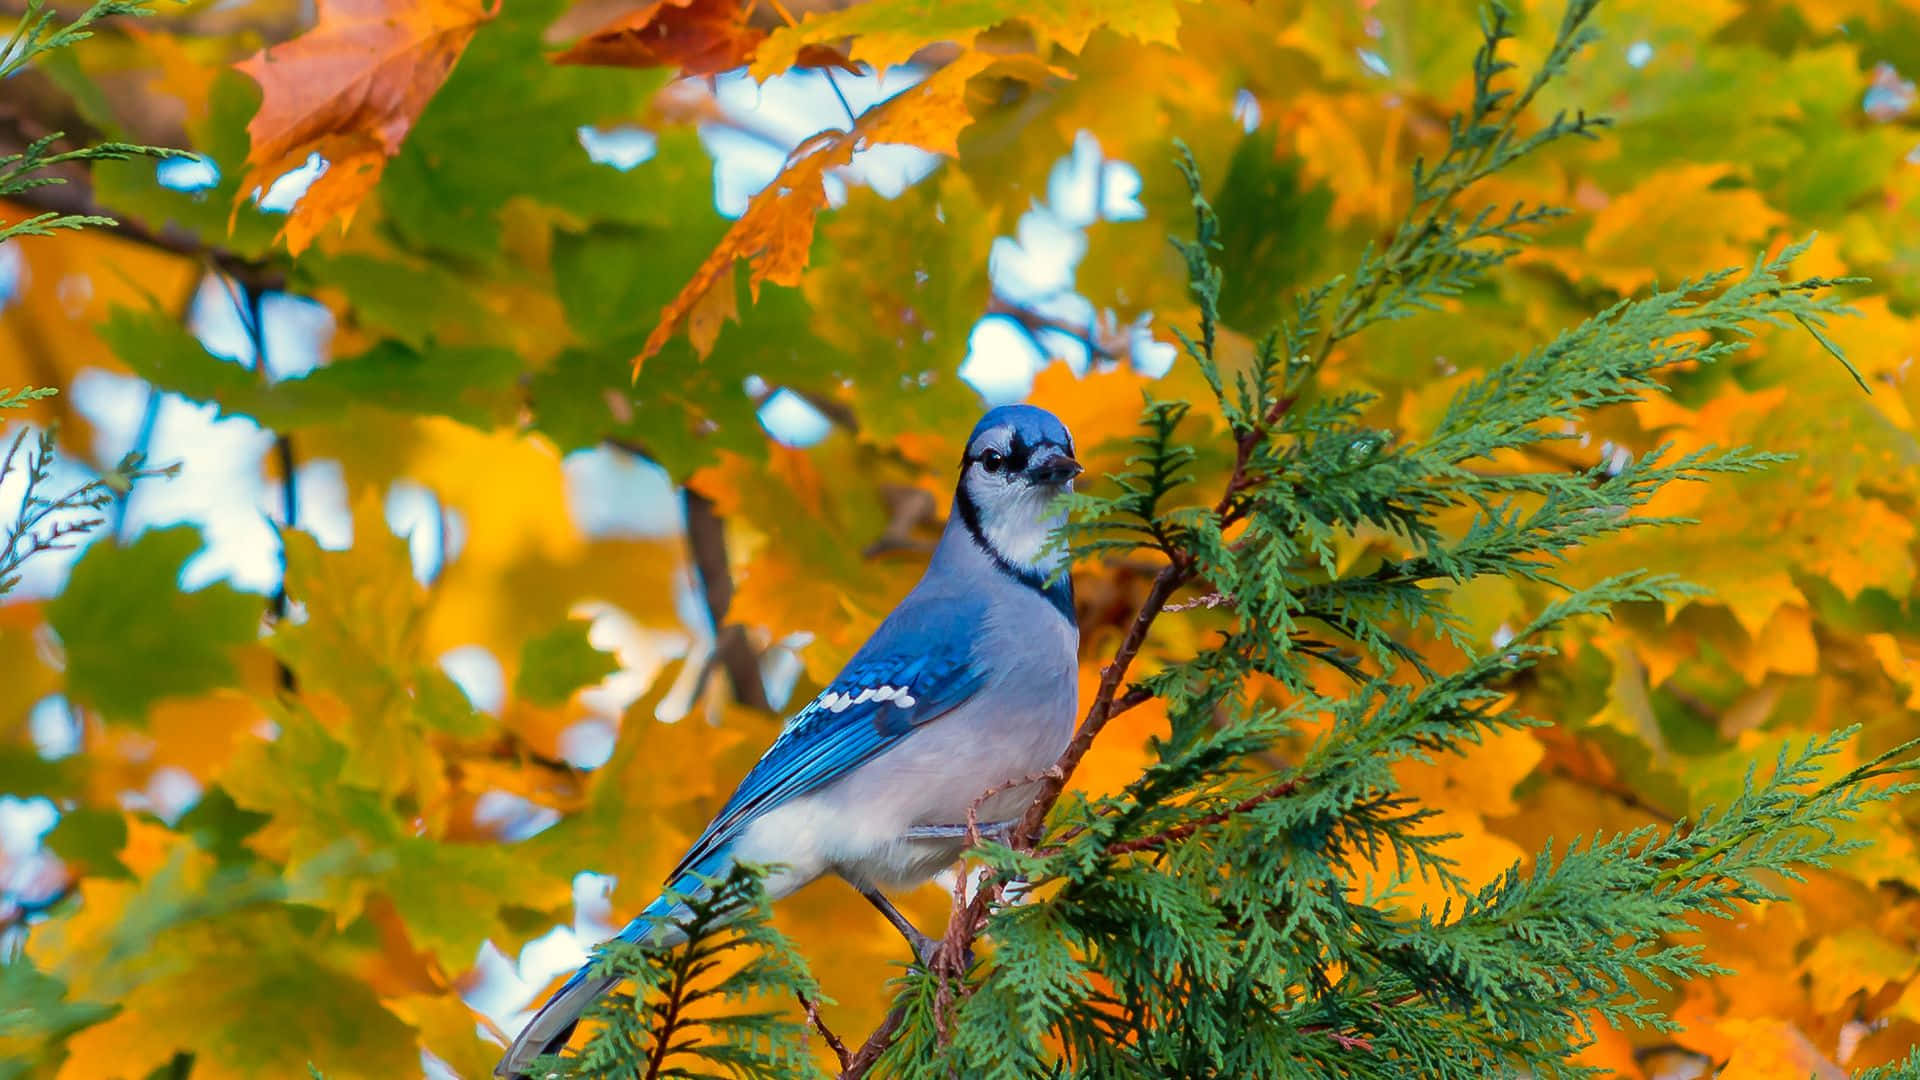 A beautiful speckled Blue Jay perched in the branches of a tree.